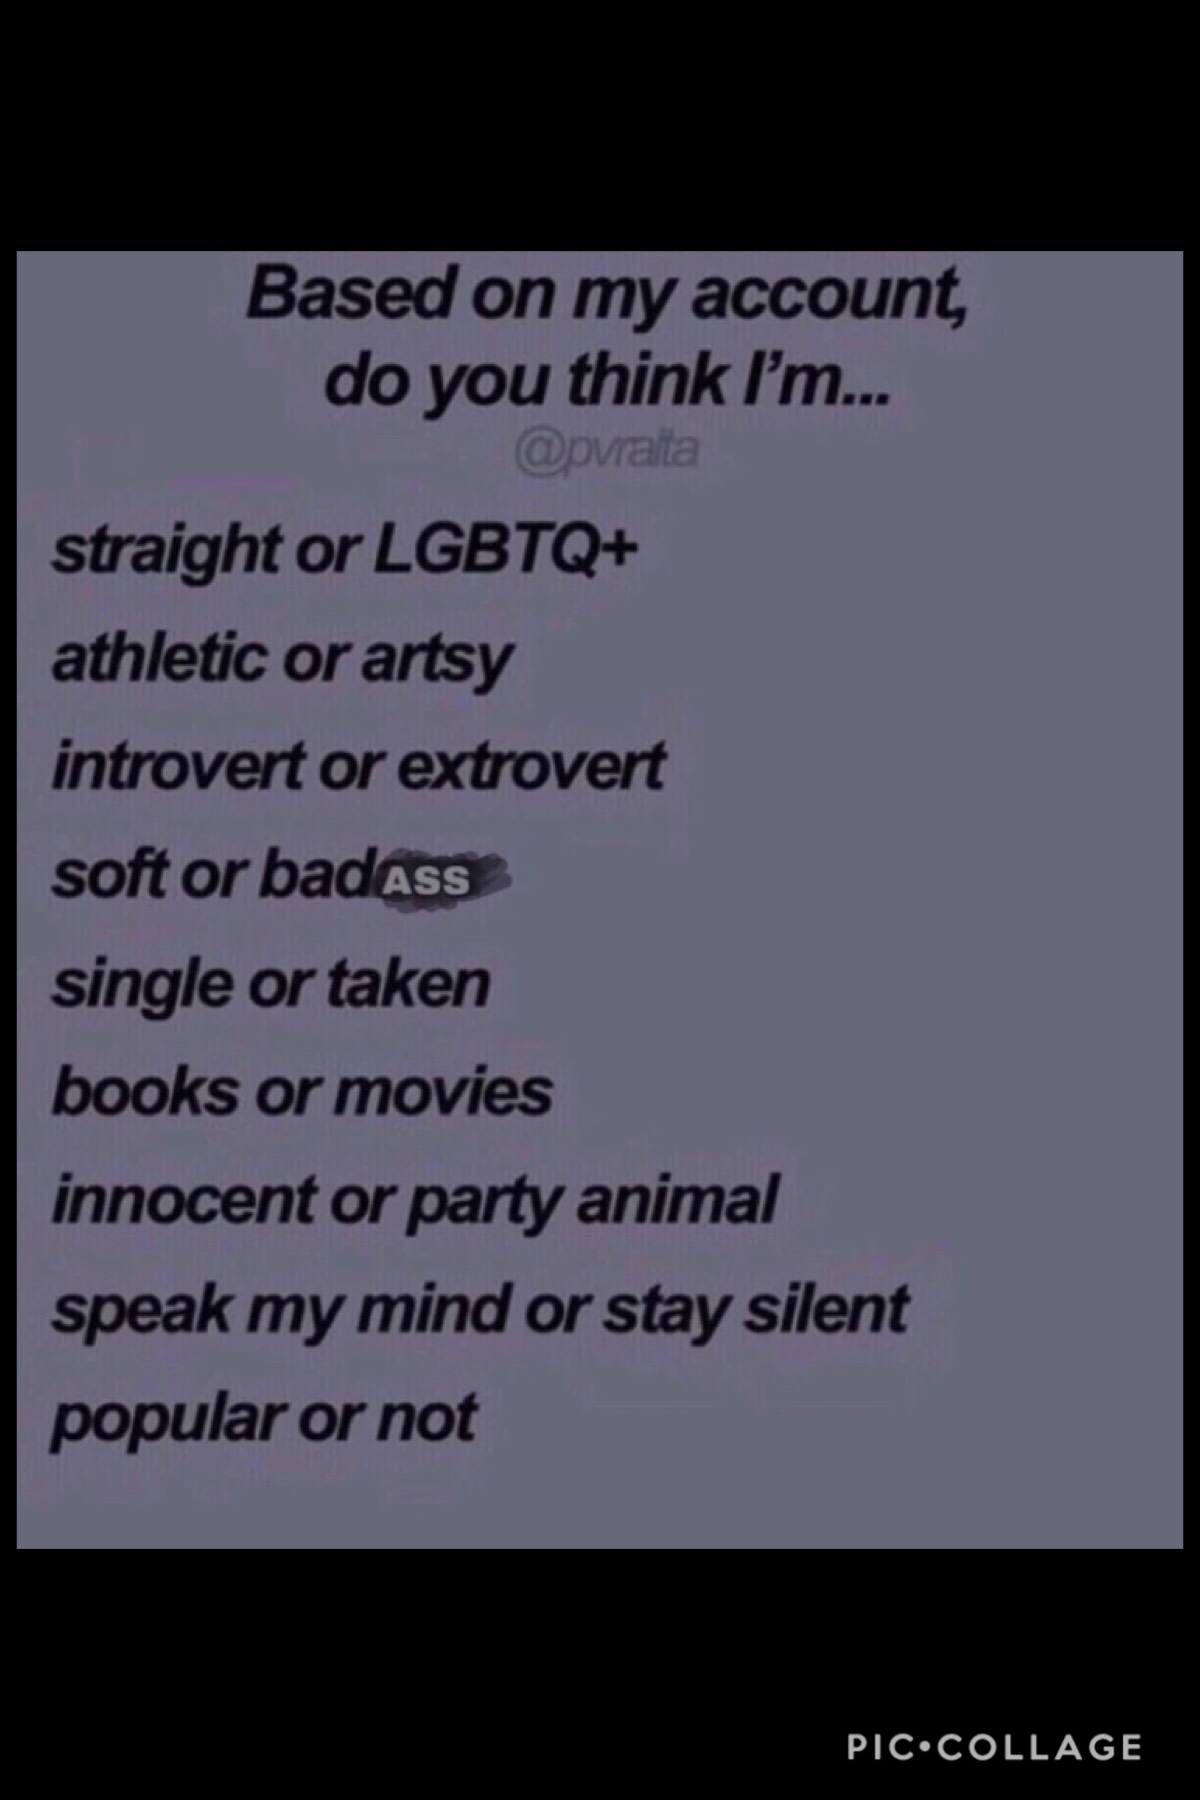 /tap\
What she’s actually post ik crazy right. Would say I’m sorry but I’m kinda not. It be like that sometimes. Sooo here’s this random thing you can do if you want.